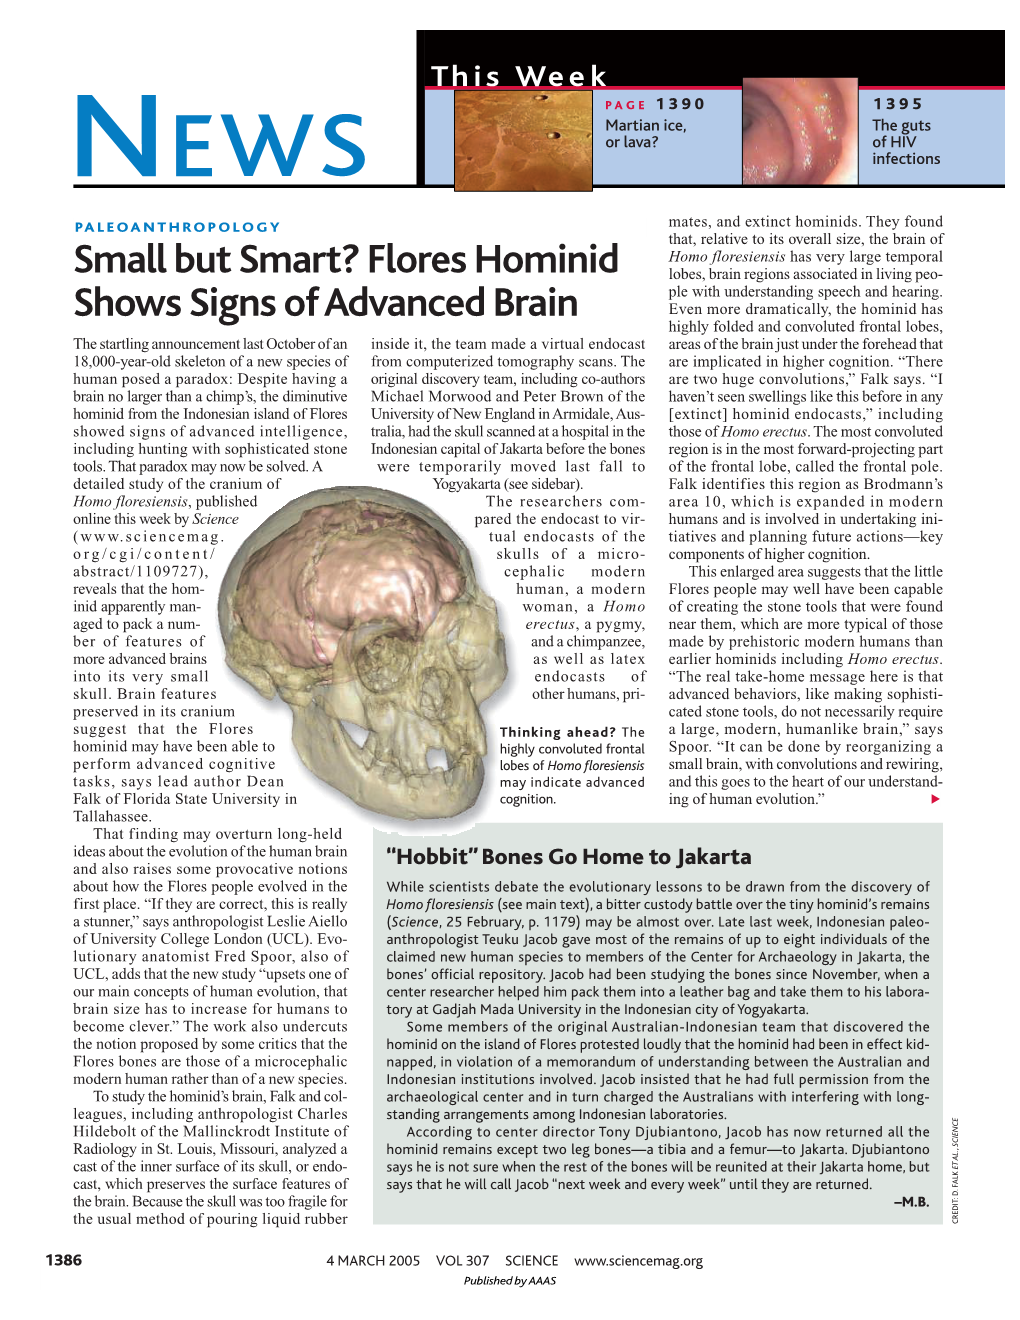 Small but Smart? Flores Hominid Shows Signs of Advanced Brain